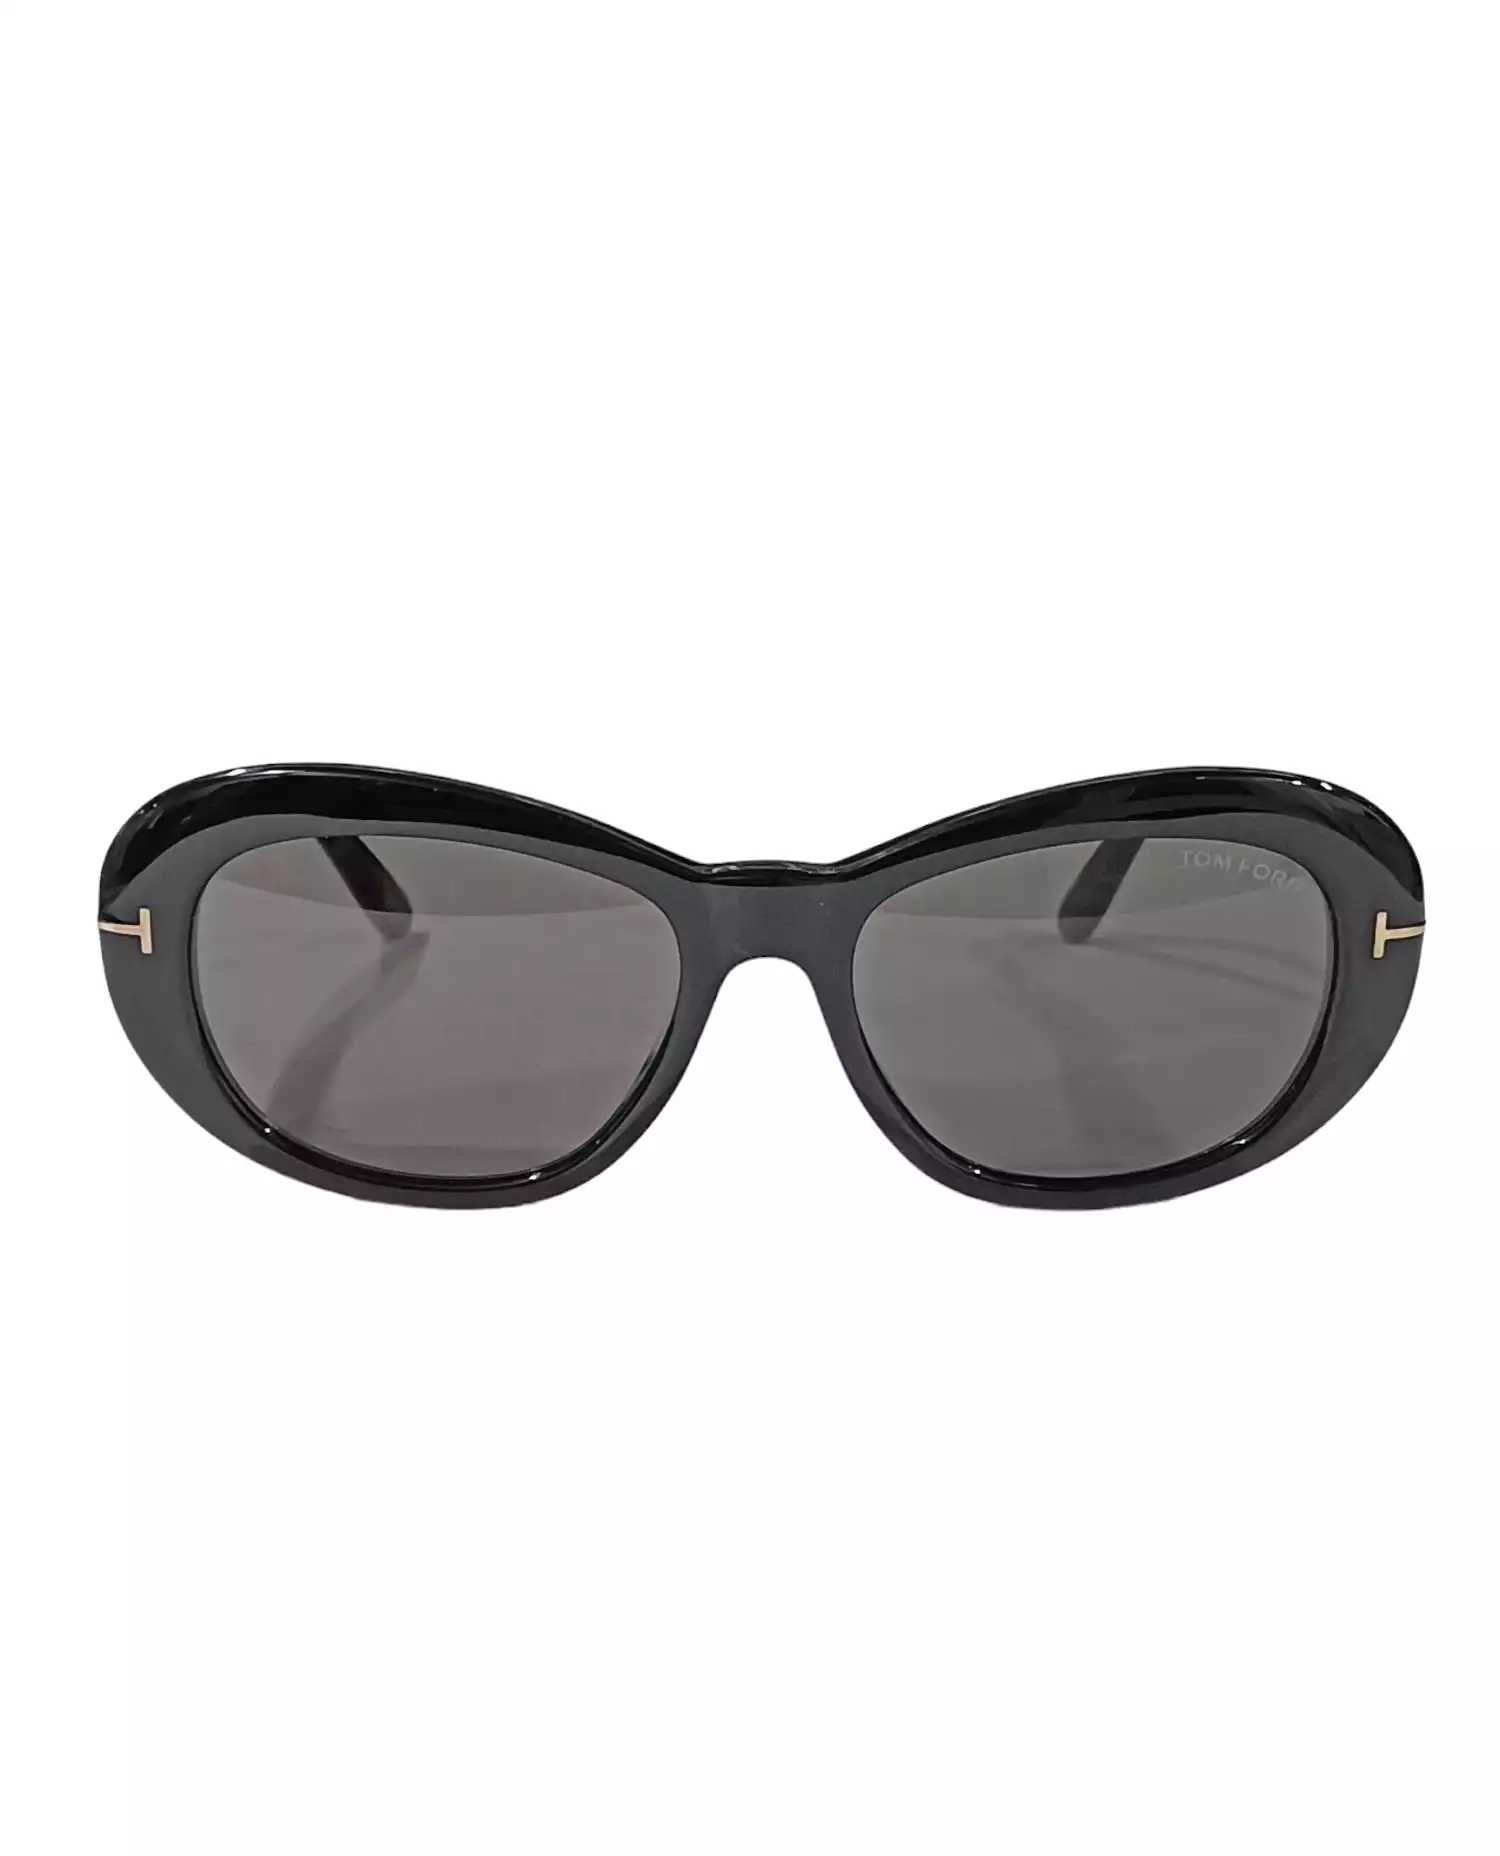 Sunglass by Tom Ford